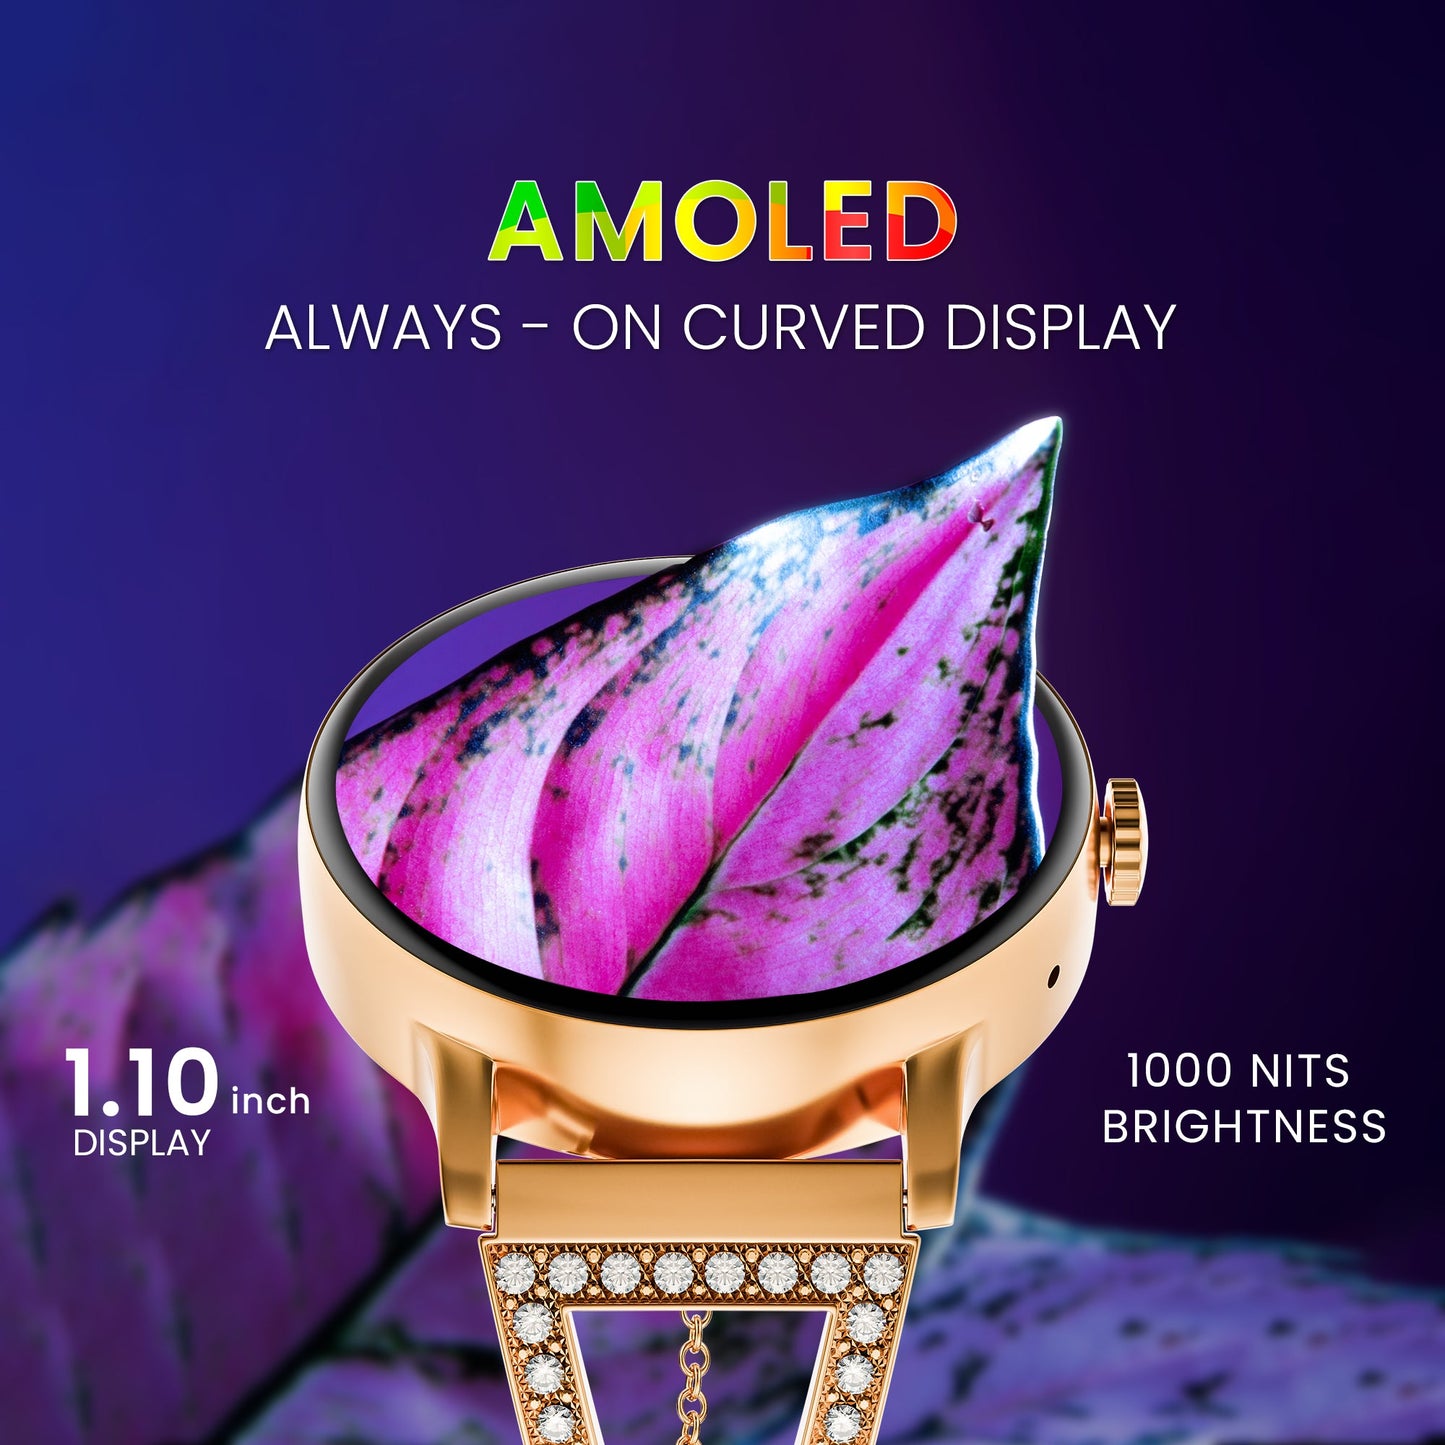 GIZMORE DAZZLE 1.10 Inch AMOLED Always-On Curved Display 1000 NITS  Female Cycle Tracker Multi Sports Mode  Bluetooth Calling Smartwatch for Women with Bracelet  Free Silicon Strap Rose Gold